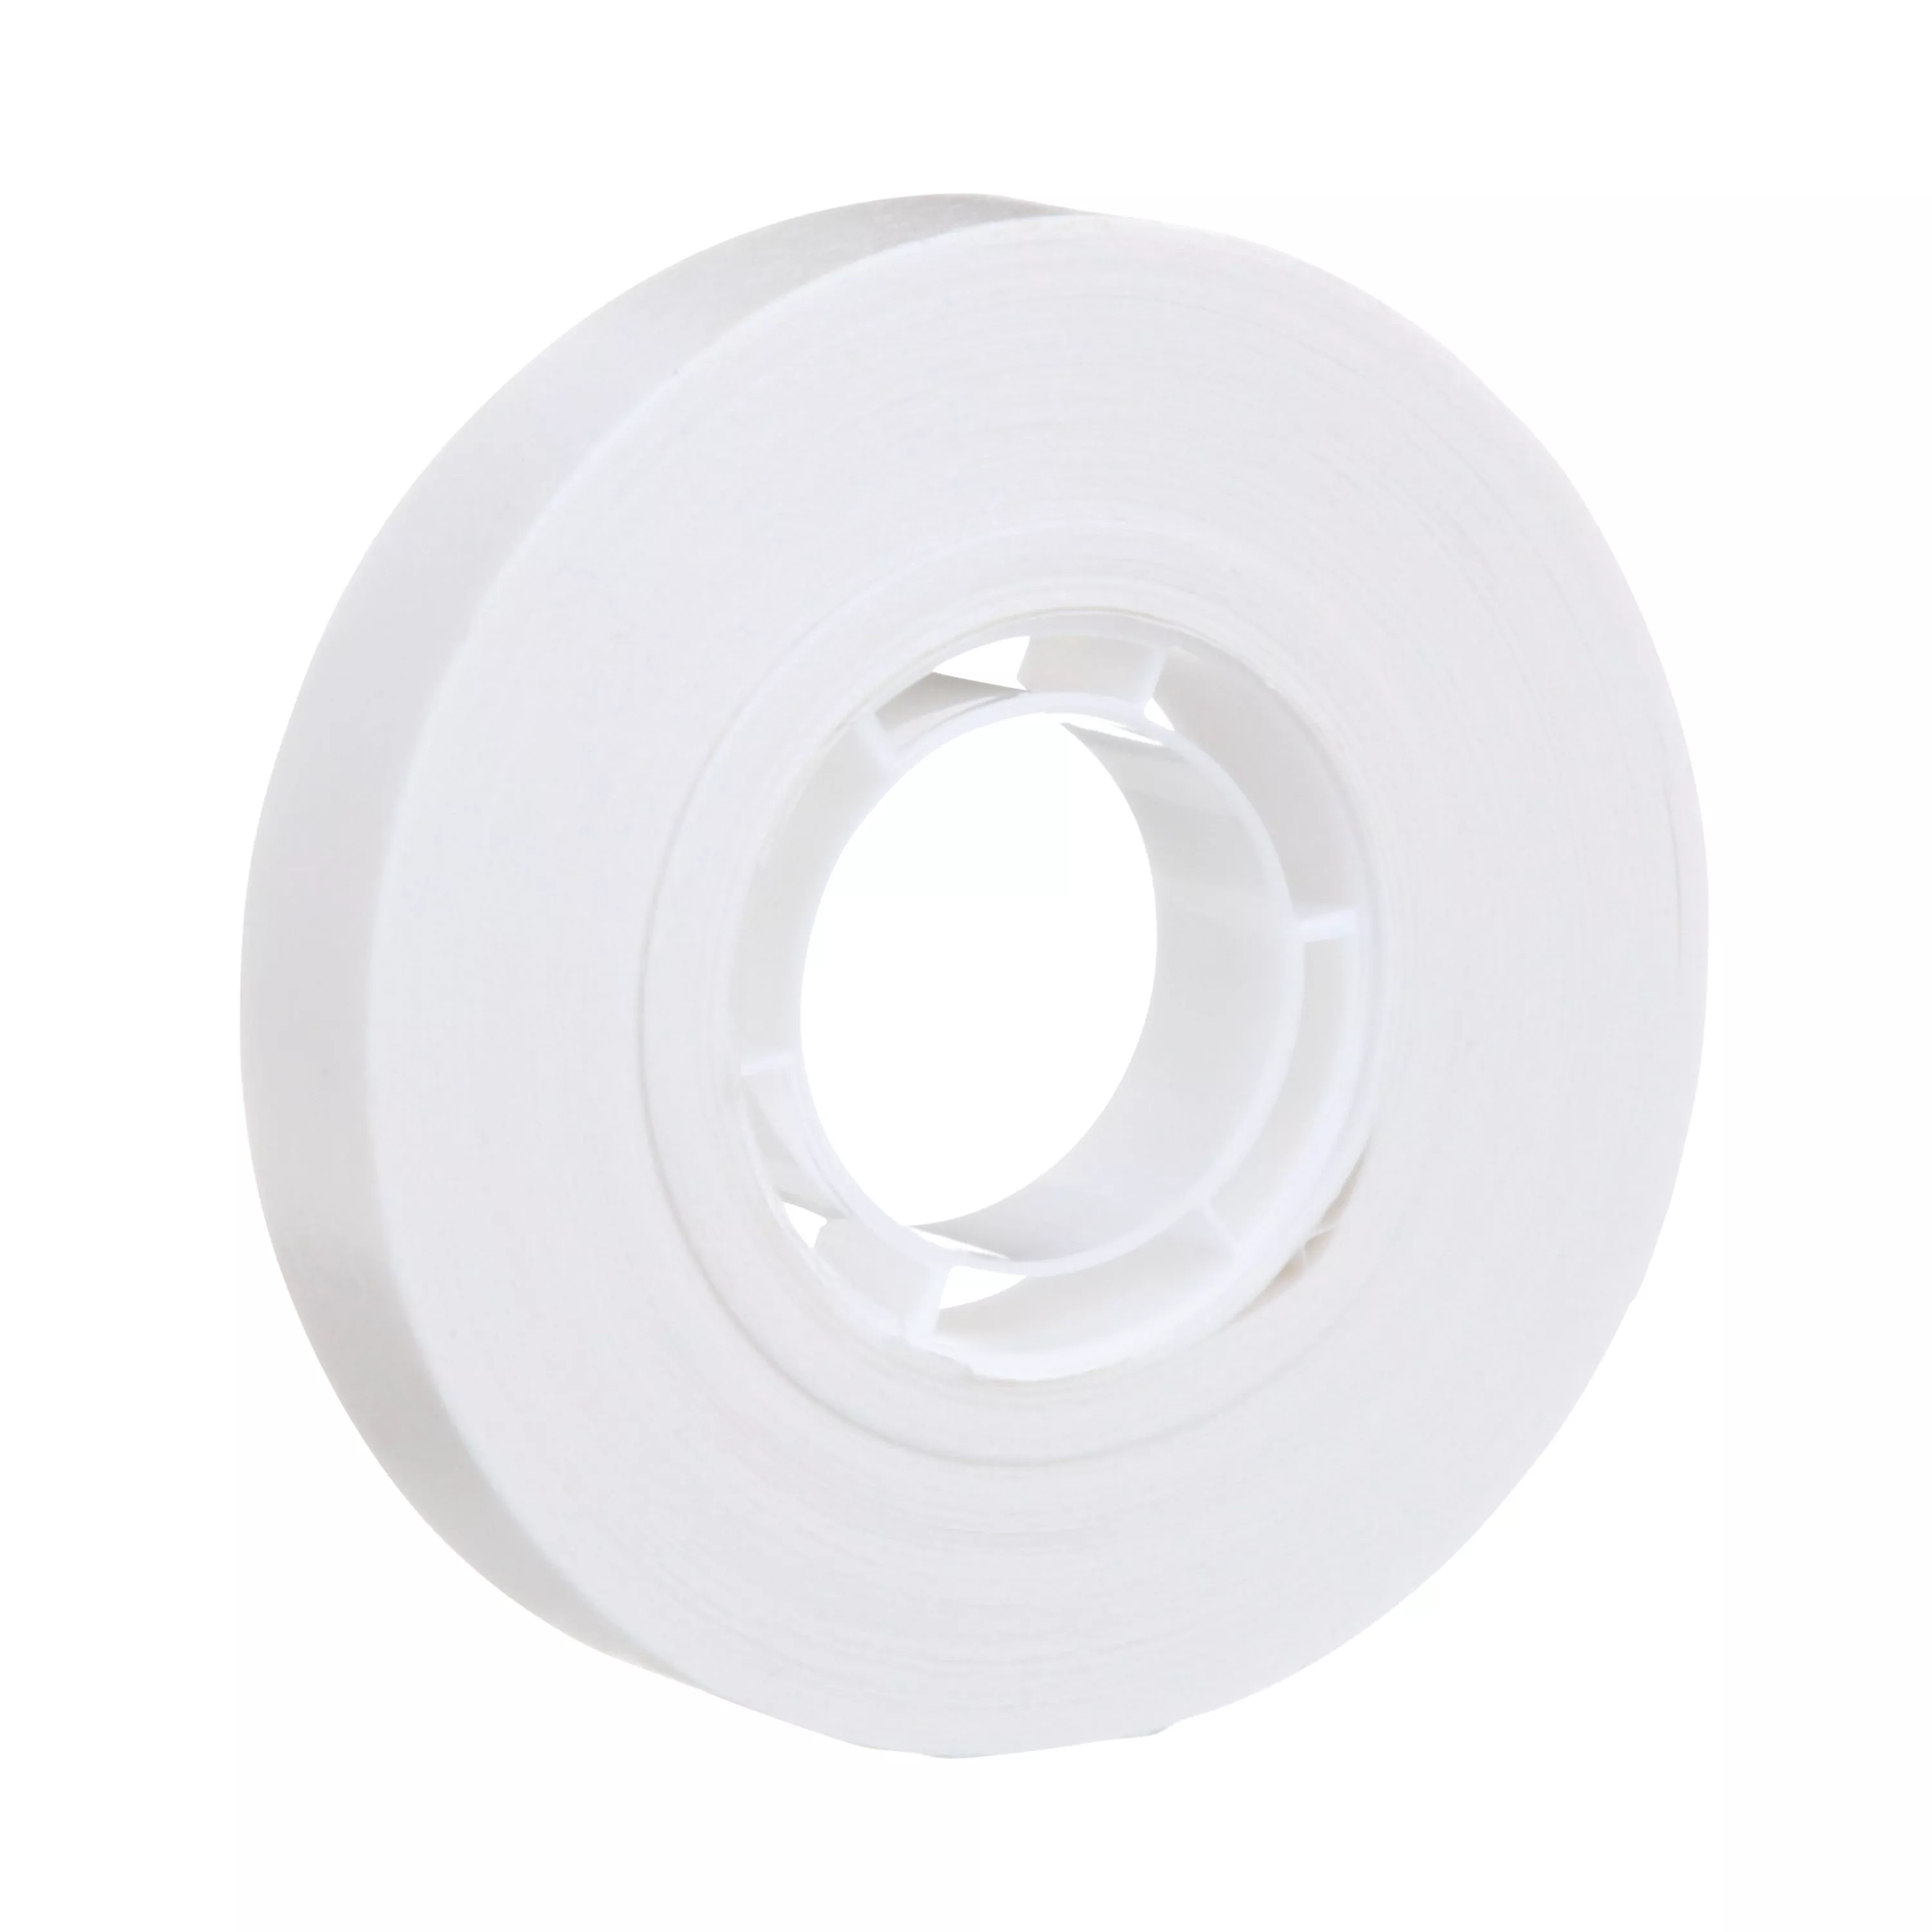 Scotch® ATG Repositionable Double Coated Tissue Tape 928, Translucent
White, 1/2 in x 18 yd, 2 mil, (12 Roll/Carton) 72 Roll/Case